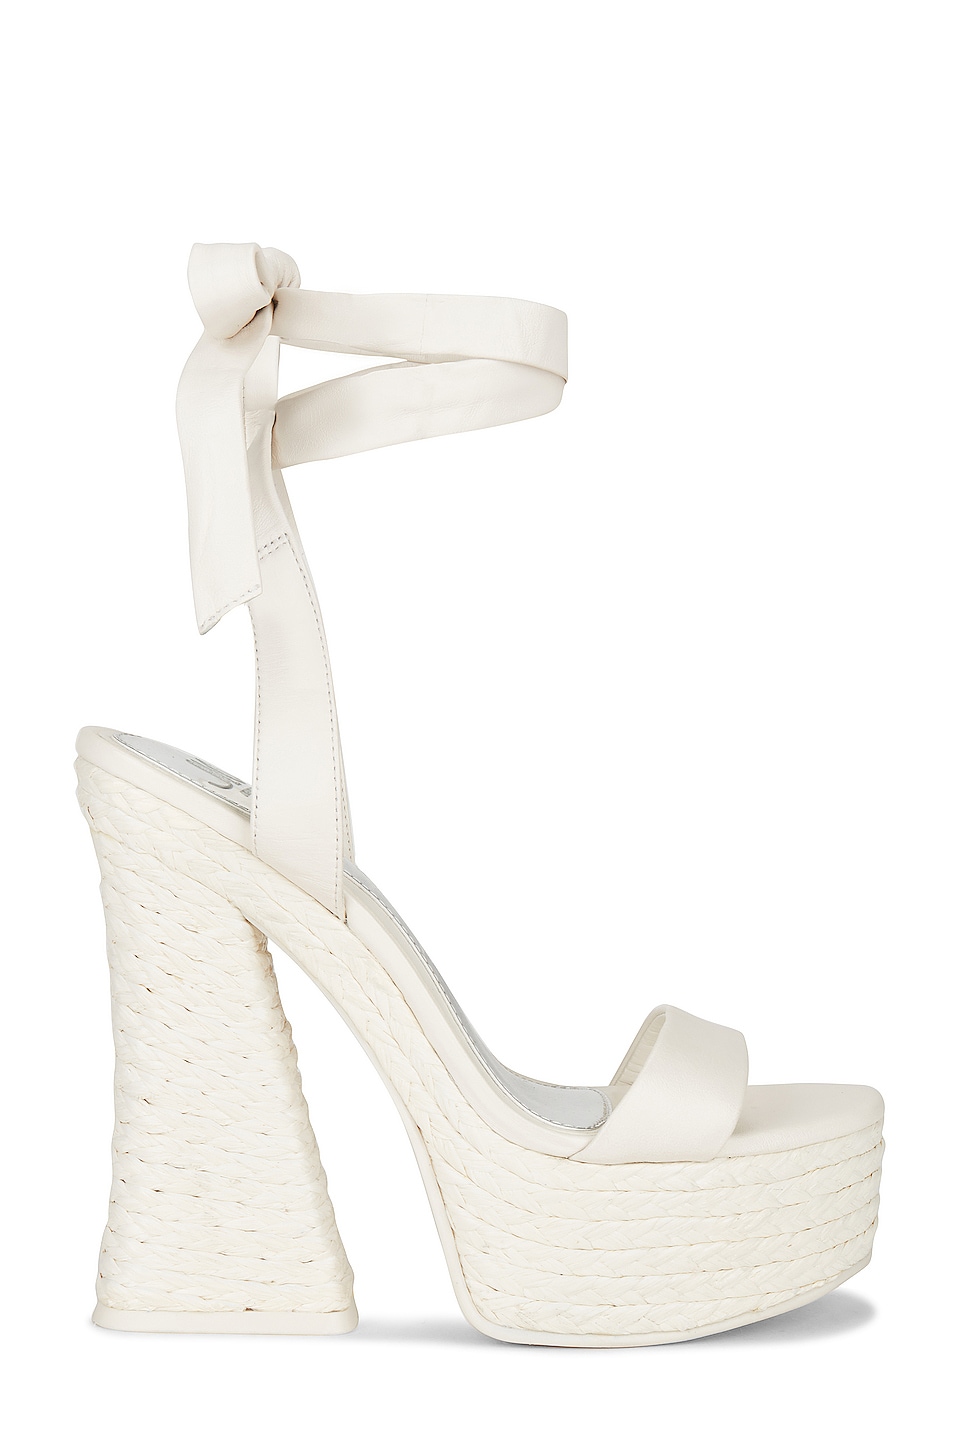 Off White Leather-Look Stiletto Heel Sandals | New Look